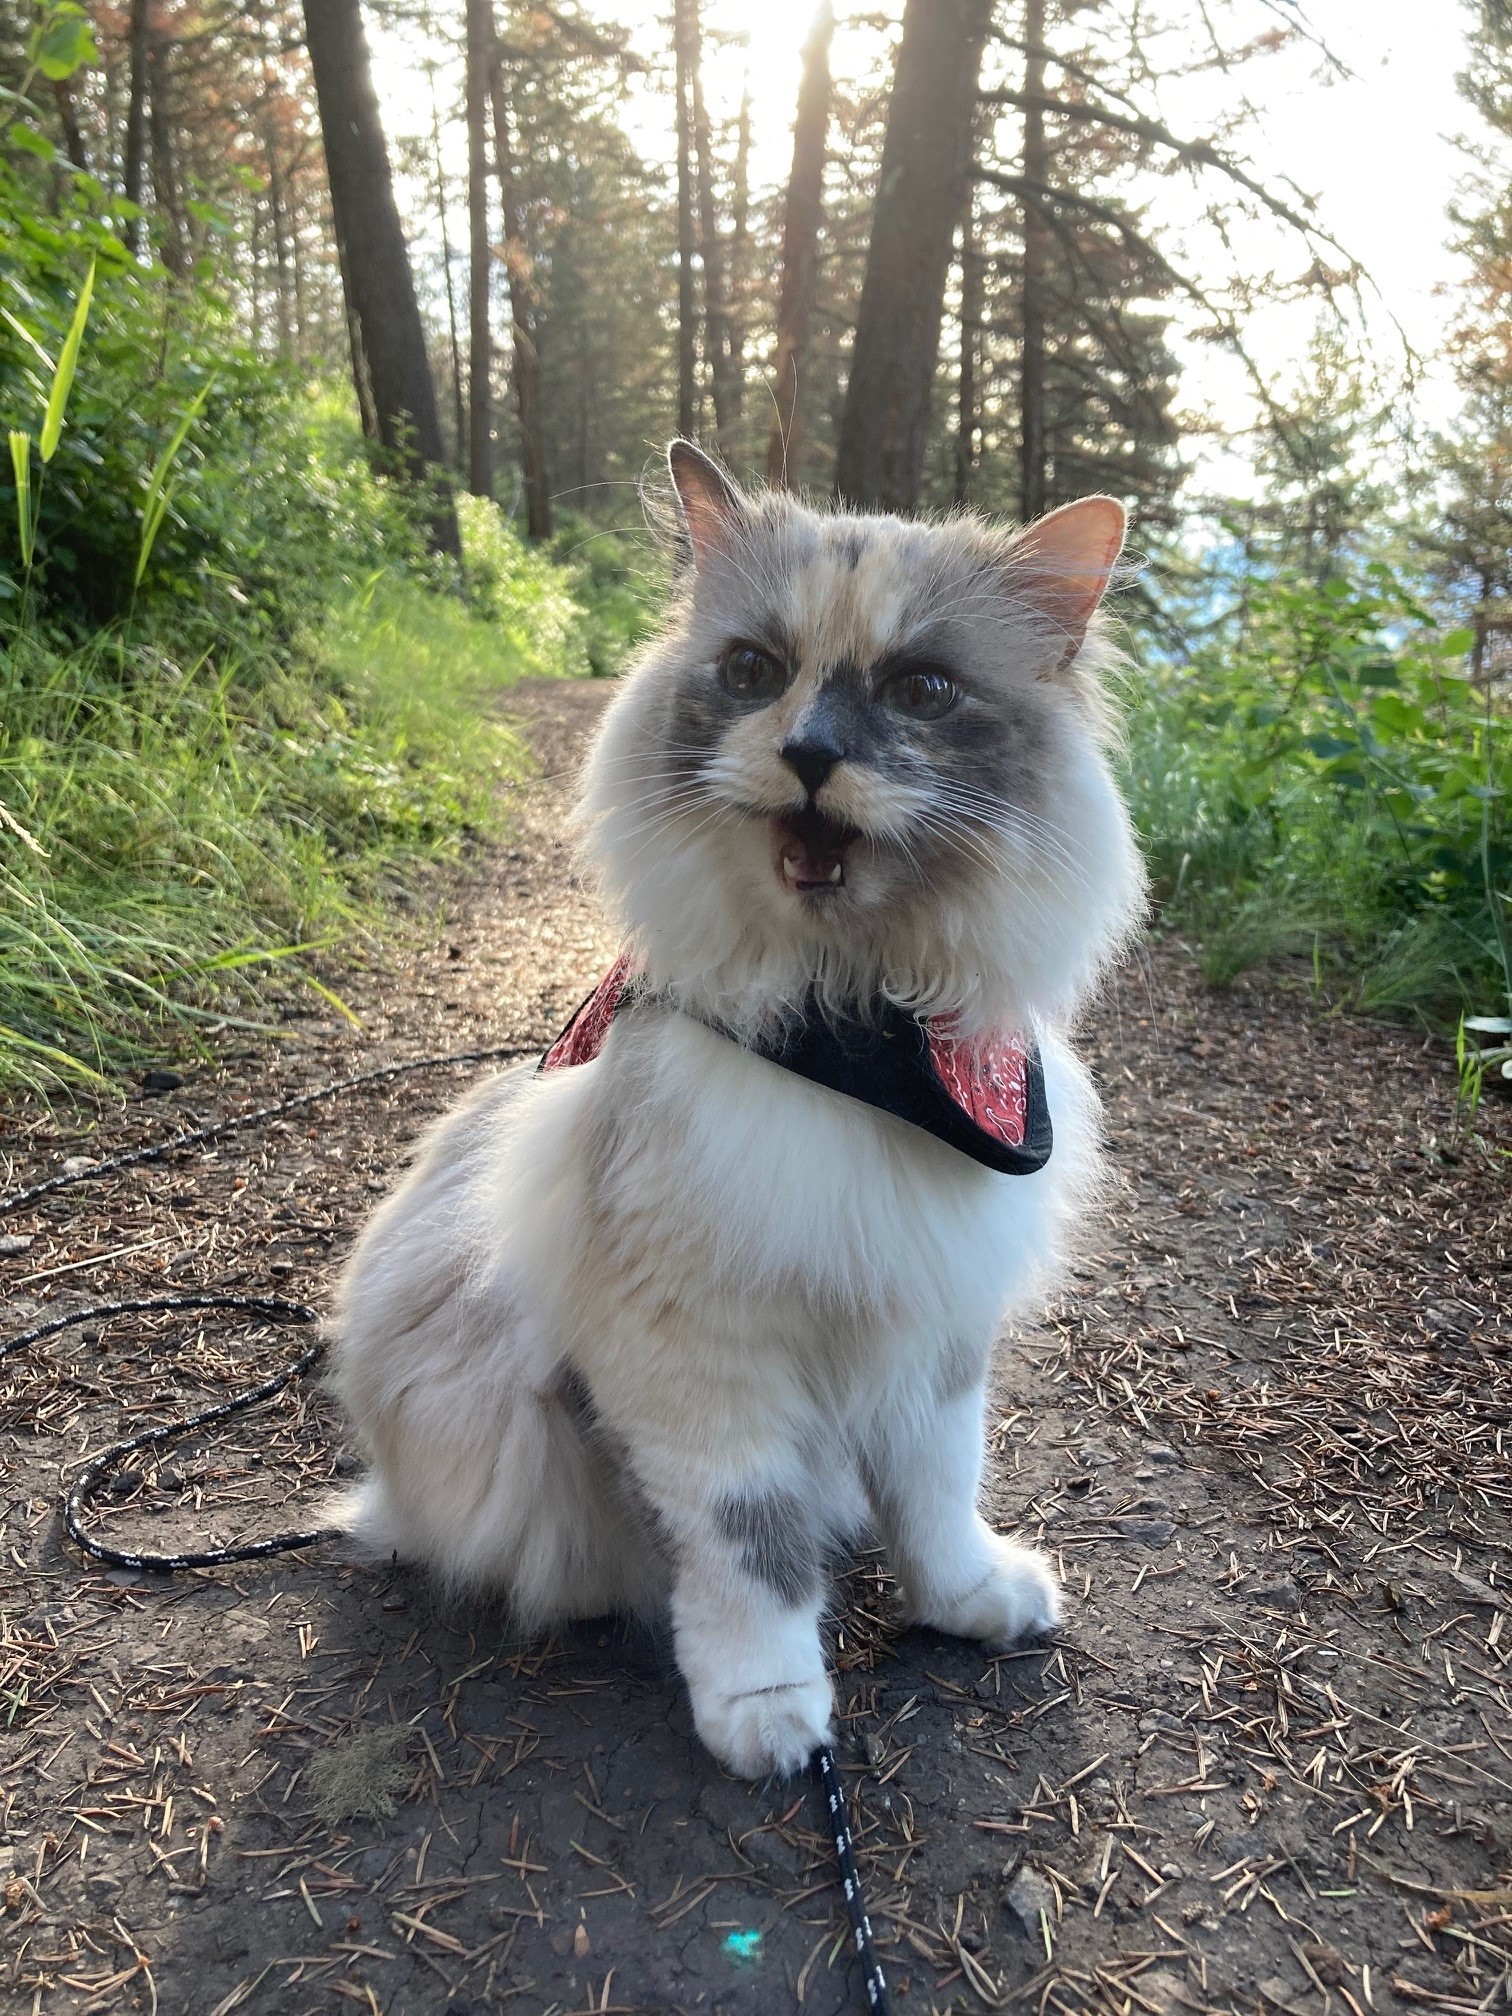 A fluffy white can sits on a hiking trail and talks to her guardian.